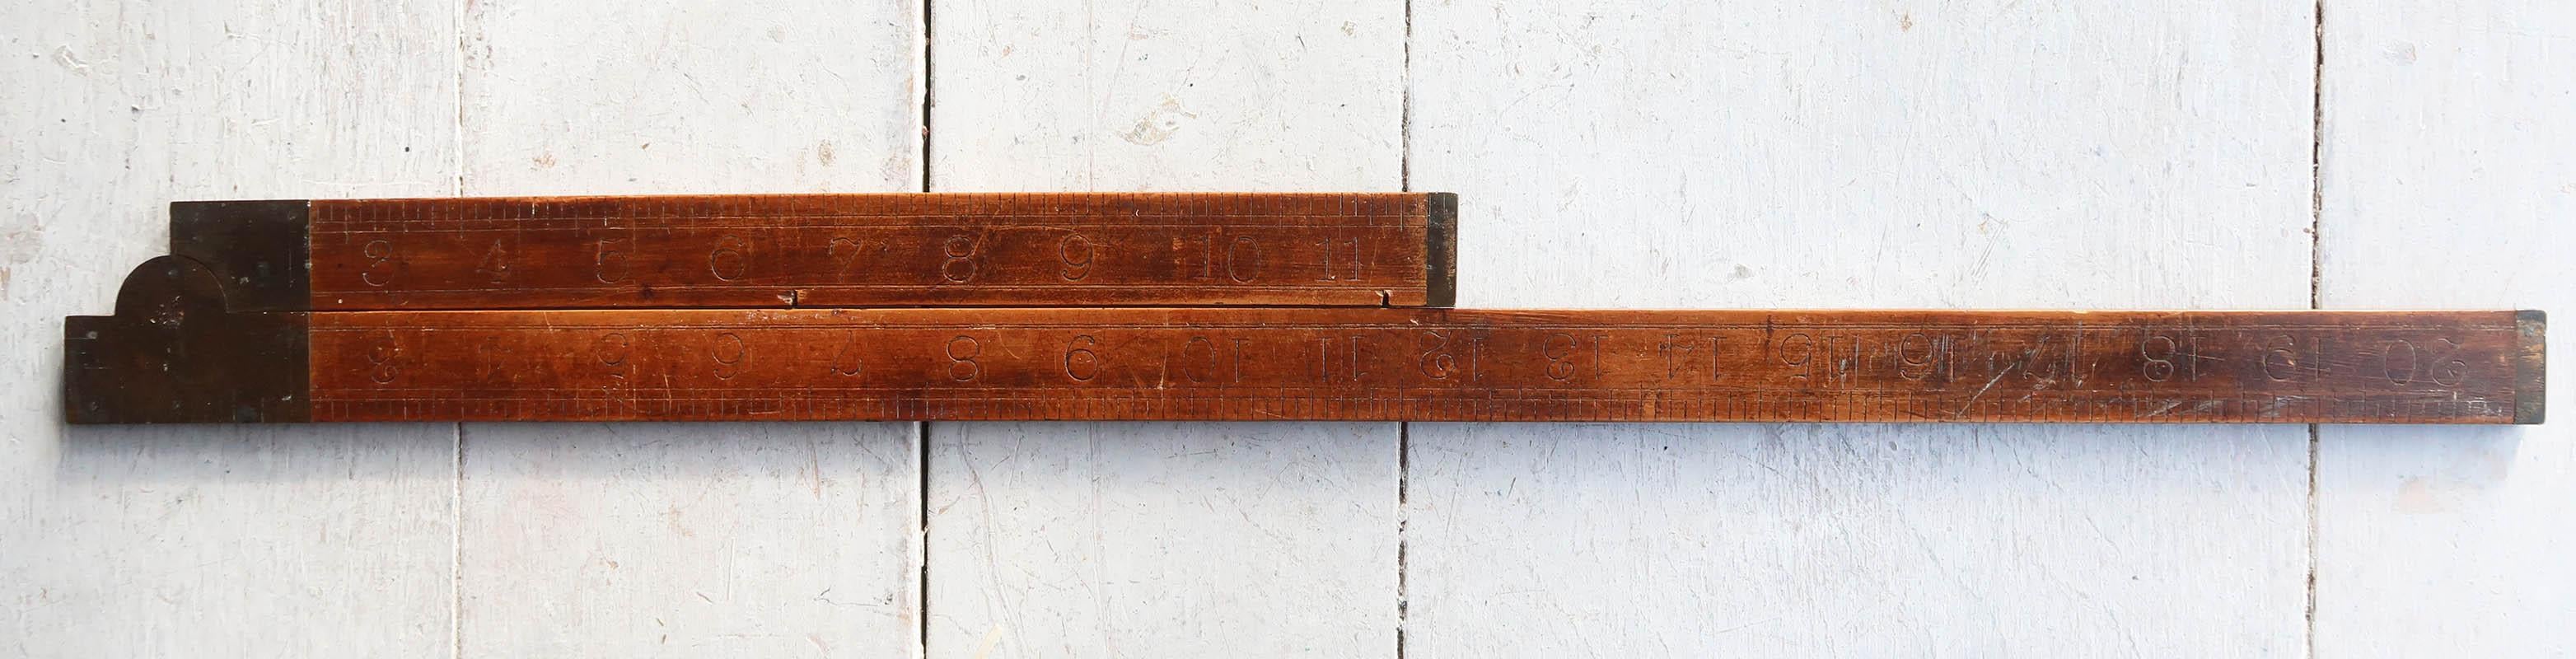 Other Antique Wood And Brass Folding Ruler By E.Preston. English, Late 19th Century For Sale